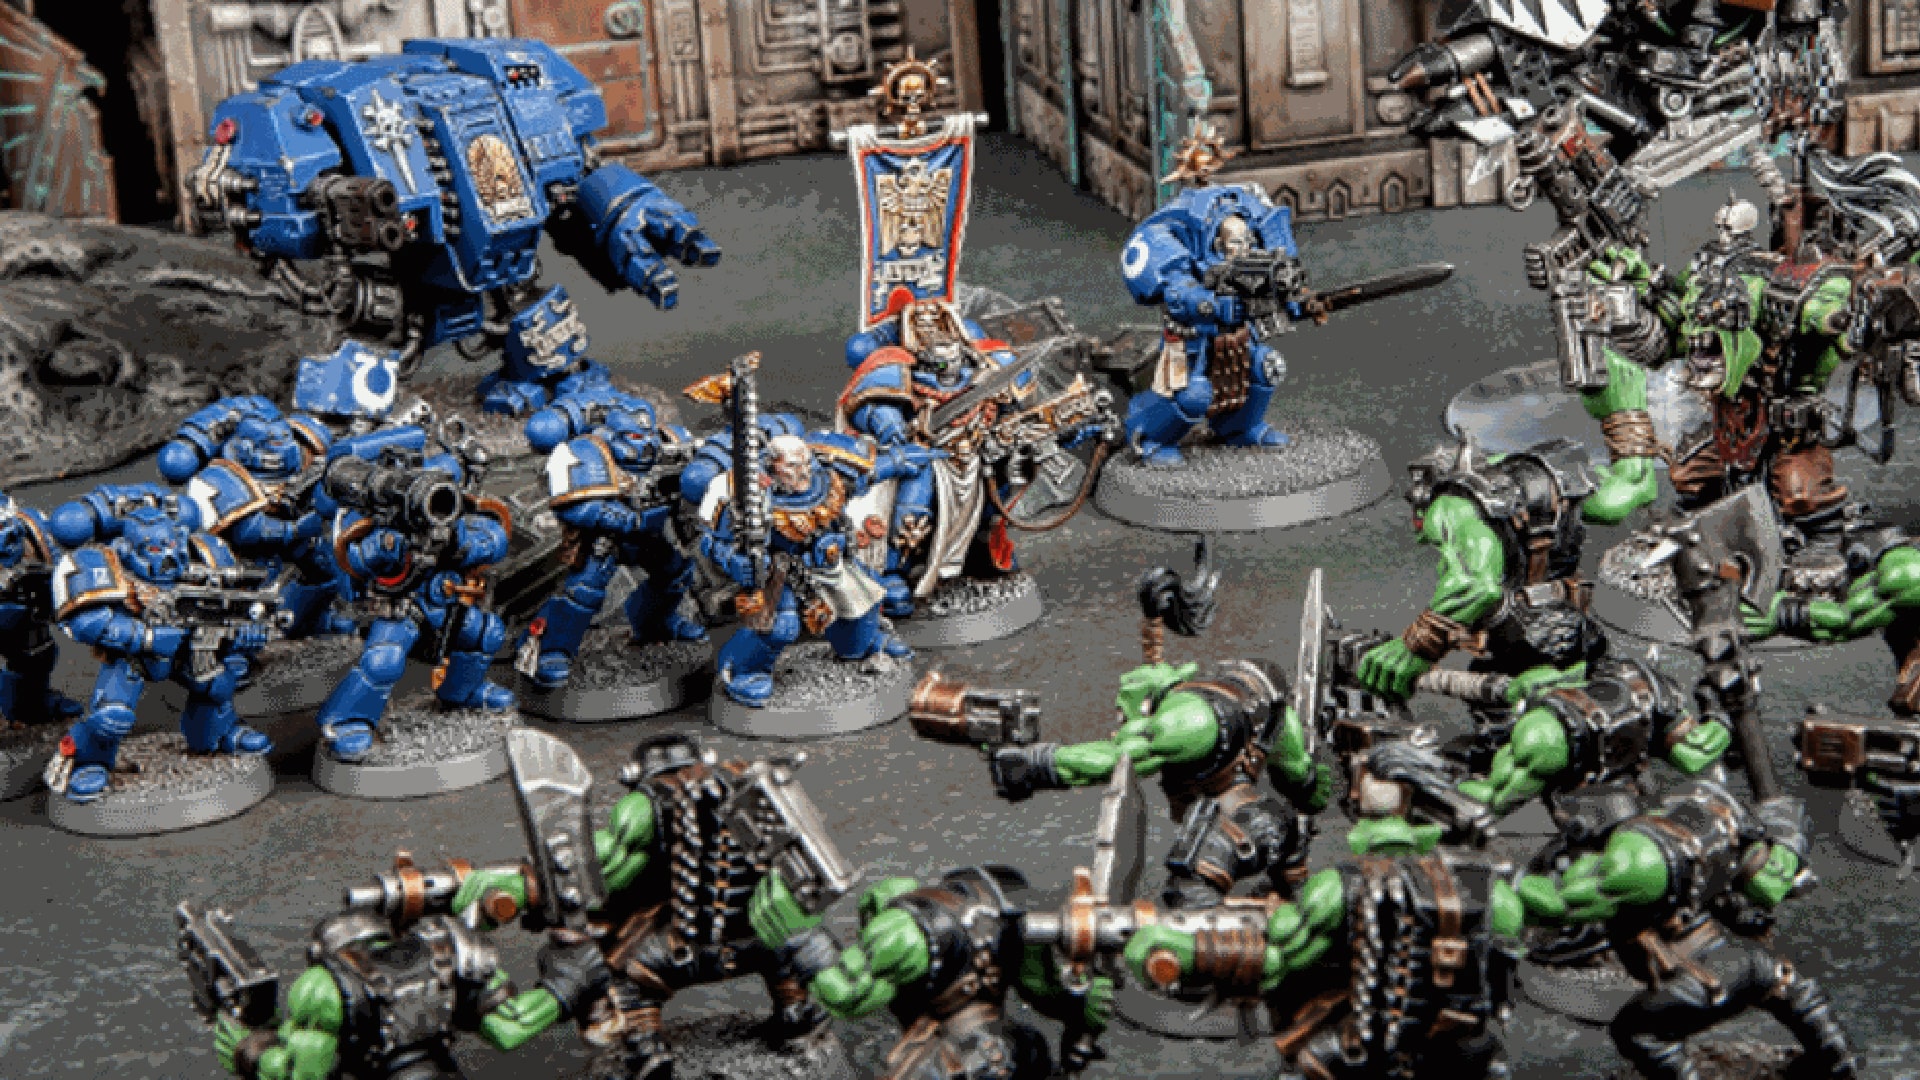 Detailed miniature models from Warhammer 40k, a popular tabletop game, showcasing intricate design and vibrant colors.